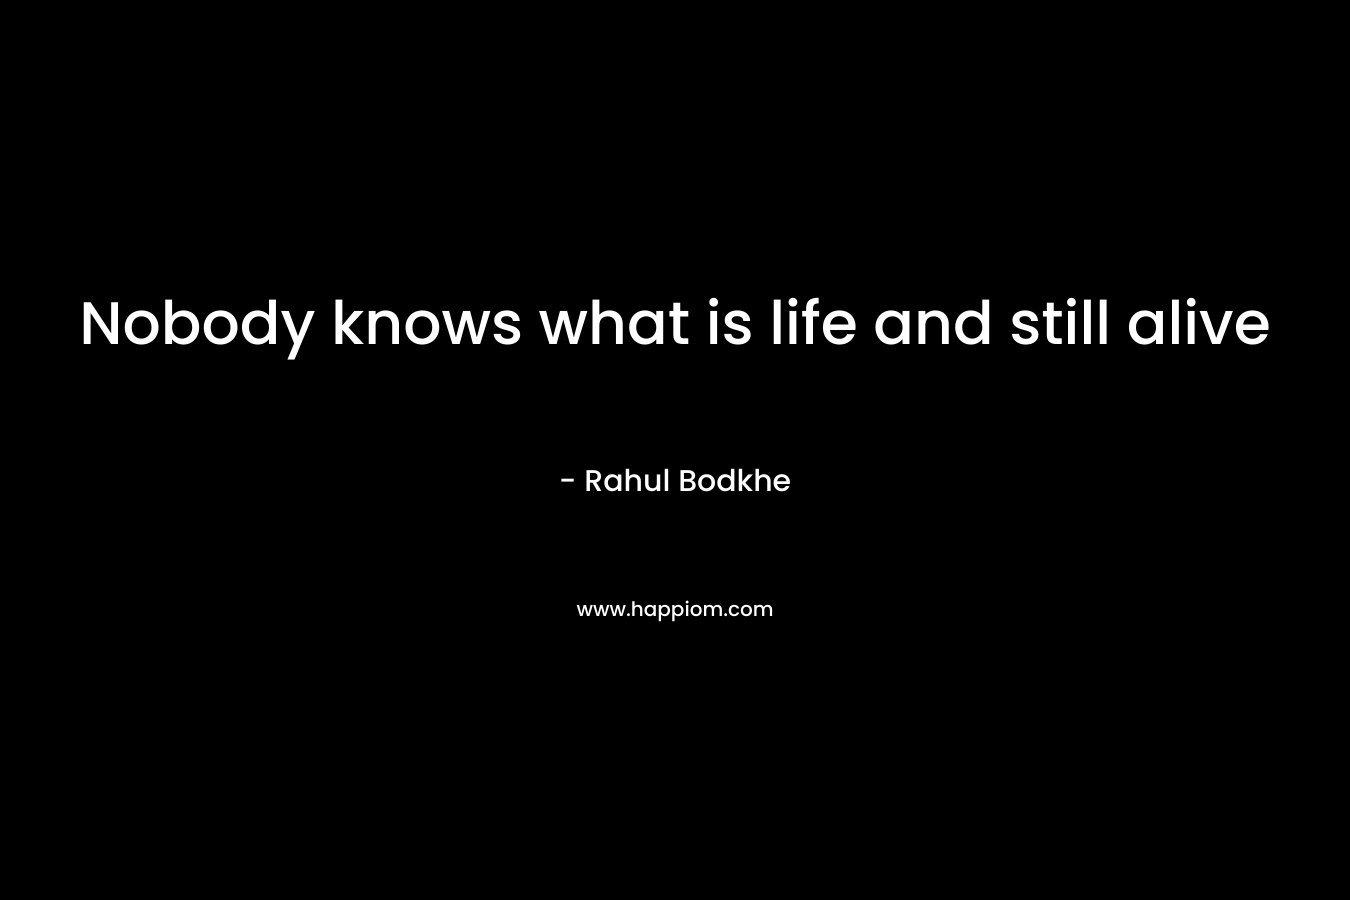 Nobody knows what is life and still alive